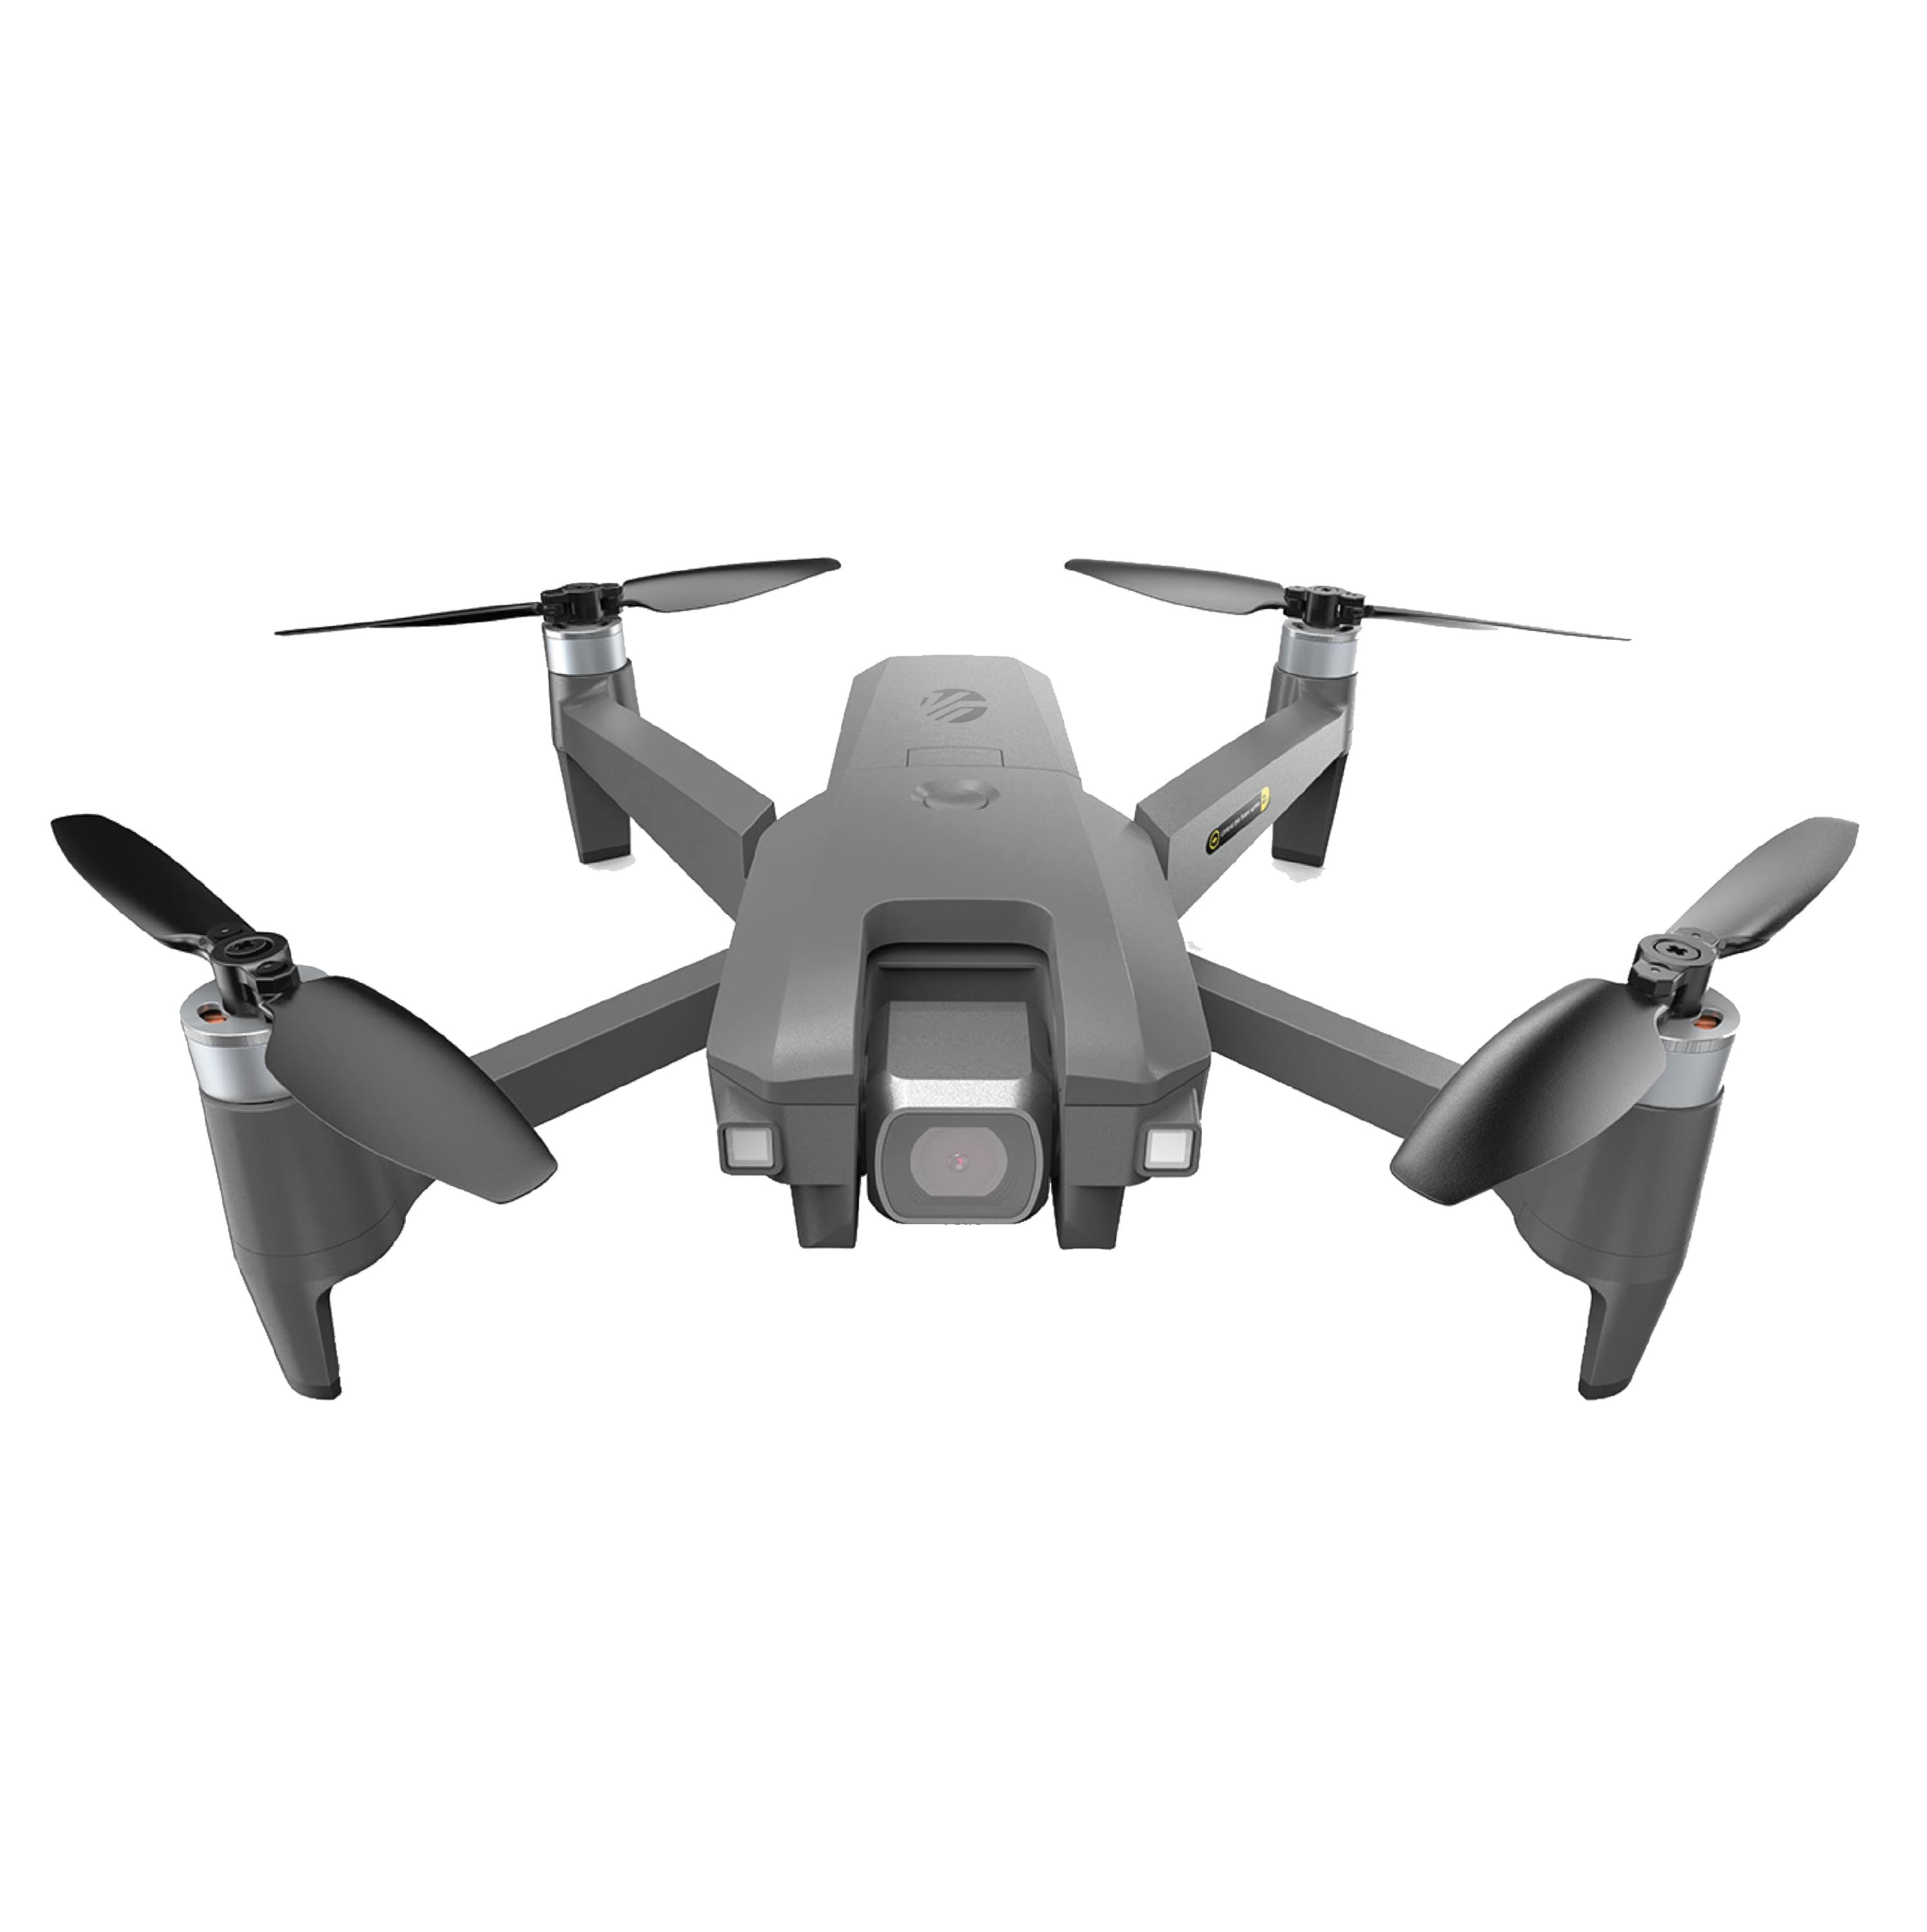 Vivitar VTI Phoenix Foldable Gray Camera Drone, GPS Drone with WiFi, 32  Mins Flight Time 2000 ft Range and Carrying Case, sized 10.3